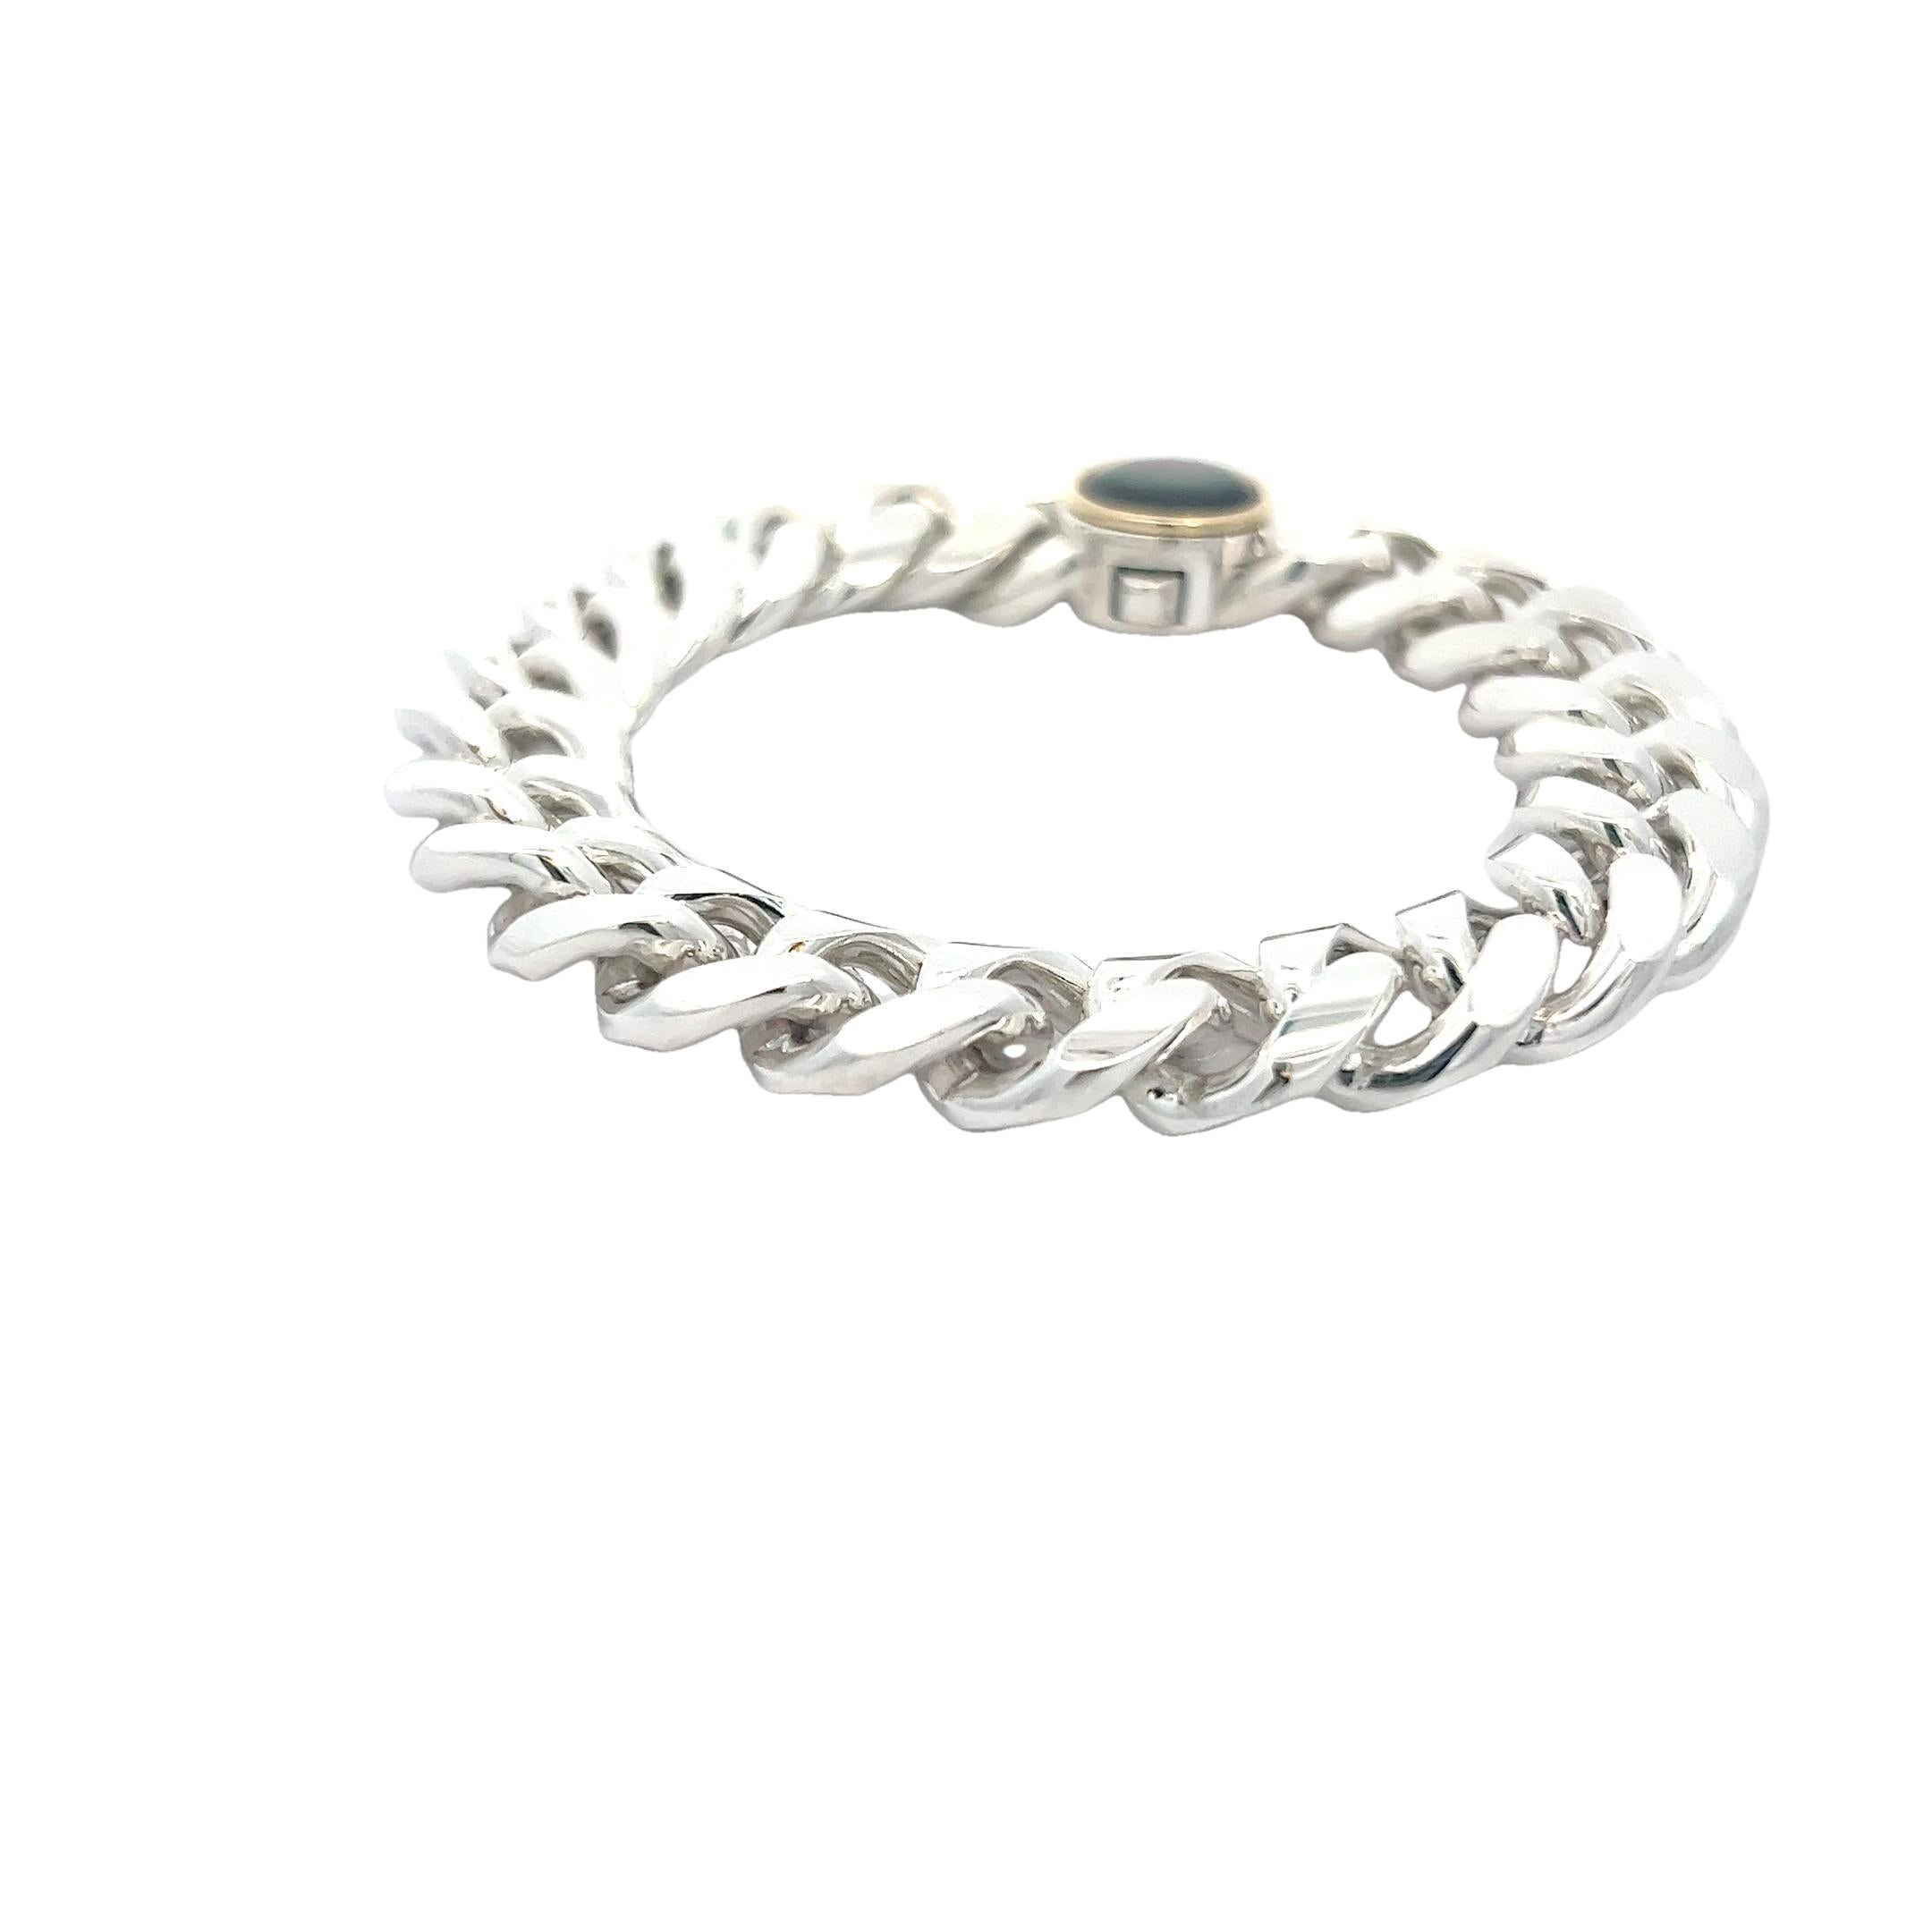 Elevate your wrist with our extraordinary Sterling Silver Cuban Link Chain Bracelet, featuring a mesmerizing Mother-of-Pearl lock adorned with an opulent 18k yellow gold bezel. This bracelet is the epitome of bold and timeless elegance, designed for